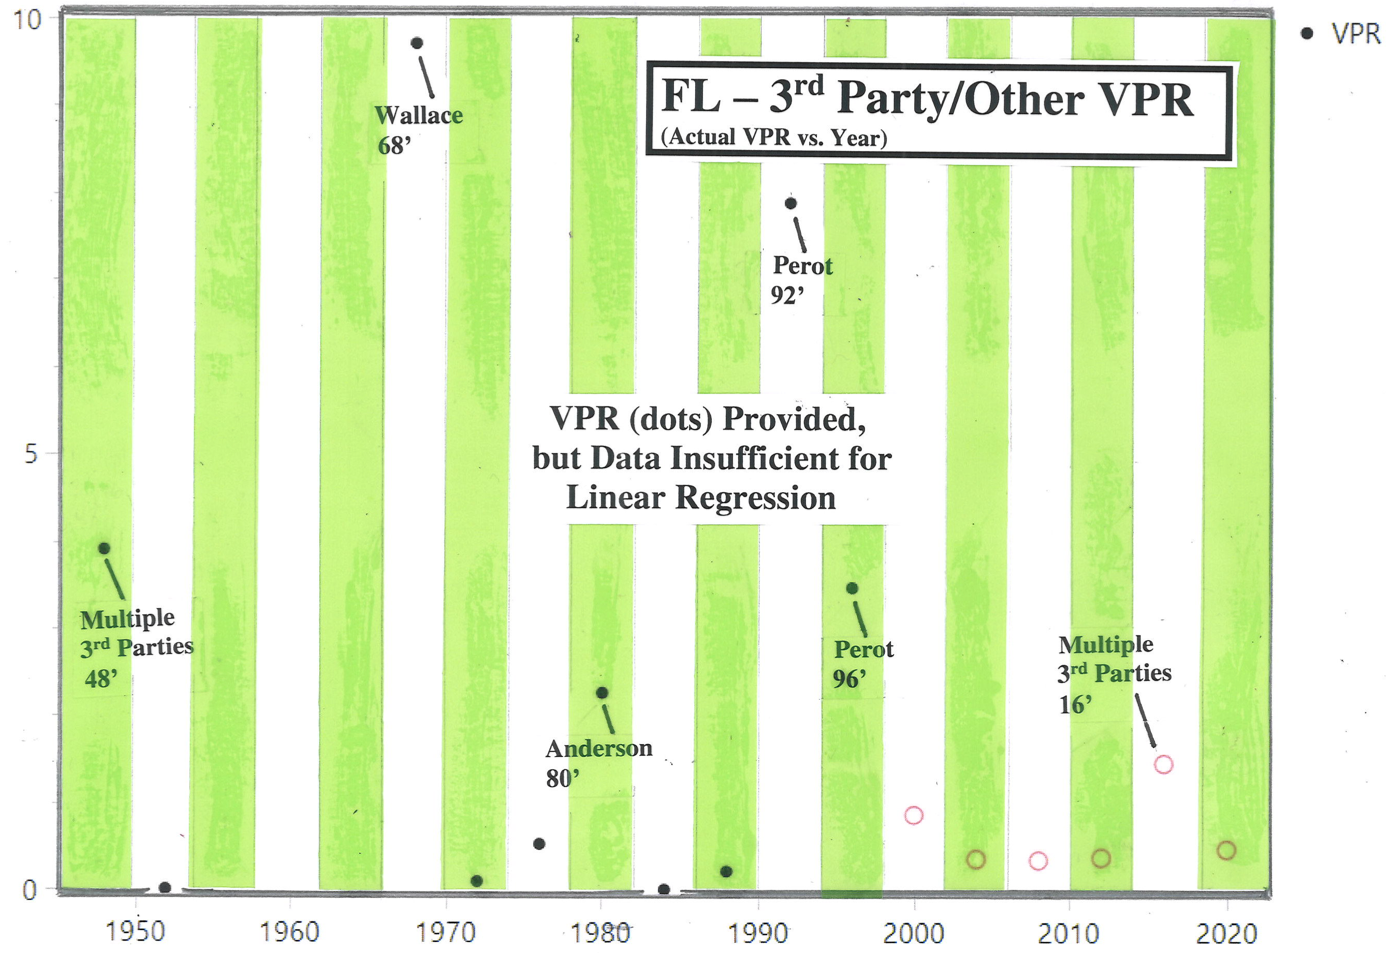 FL – 3rd Party/Other VPR